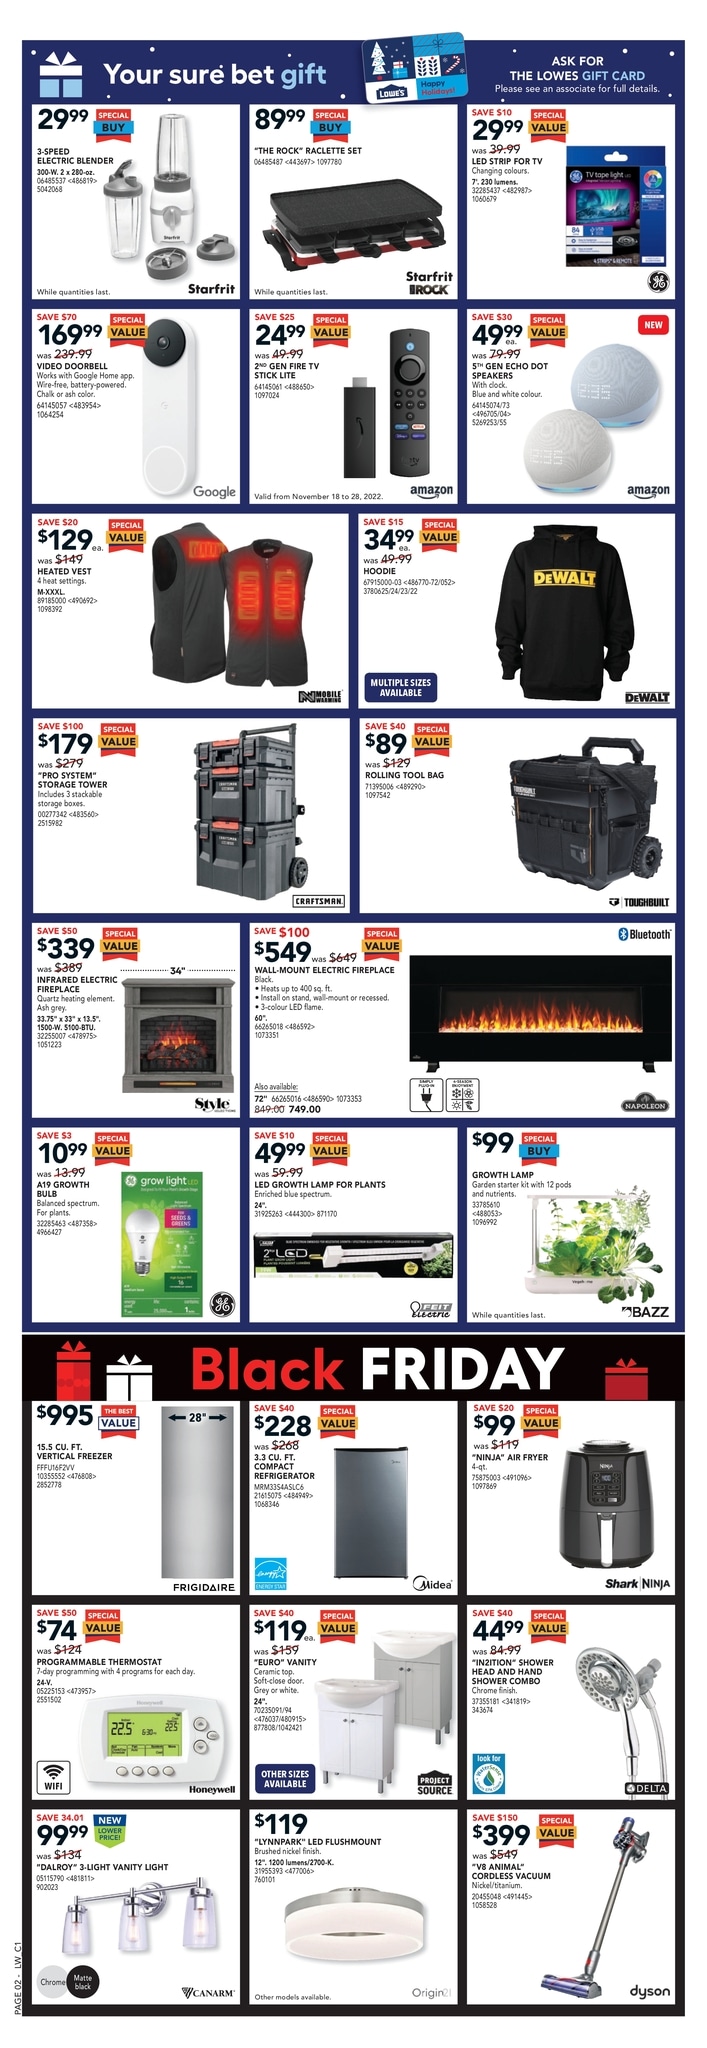 LOWE'S - Weekly Flyer Specials - Black Friday - Page 3